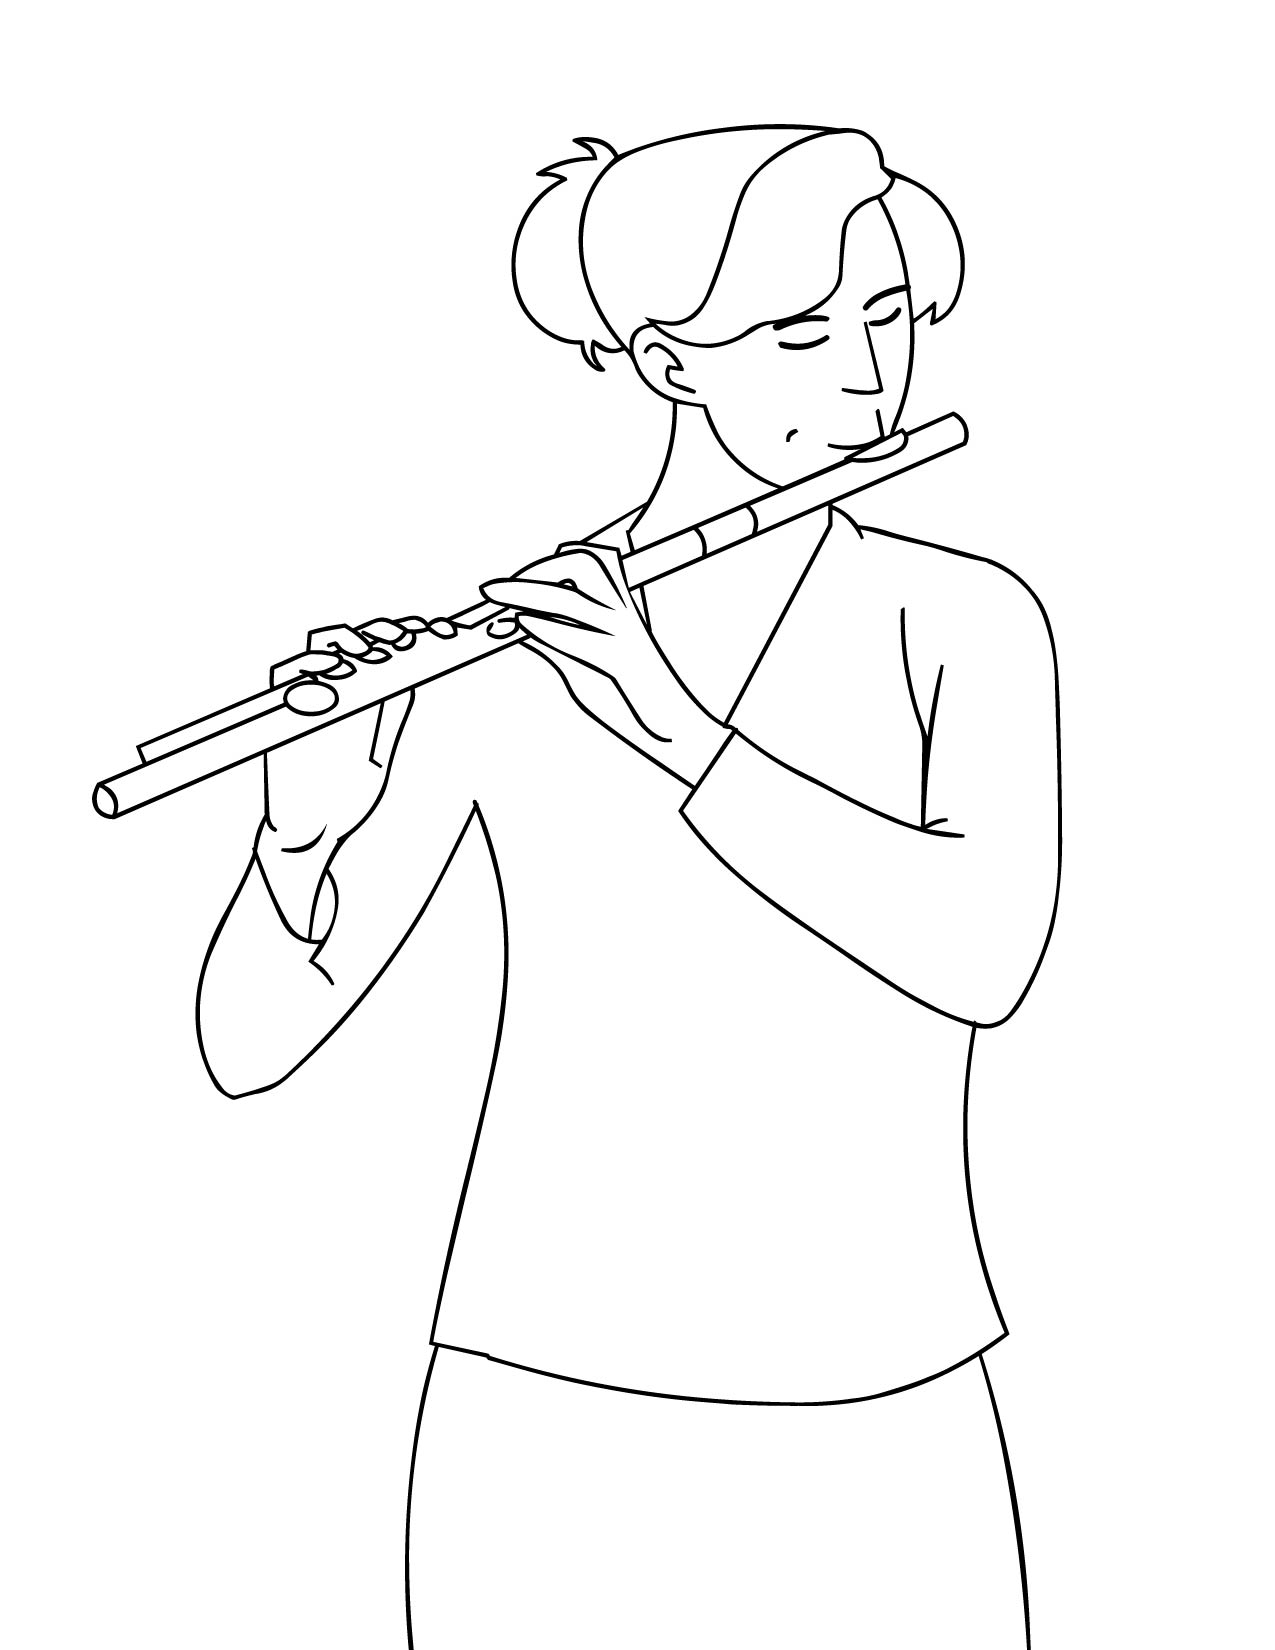 Woman Playing Flute Coloring Page